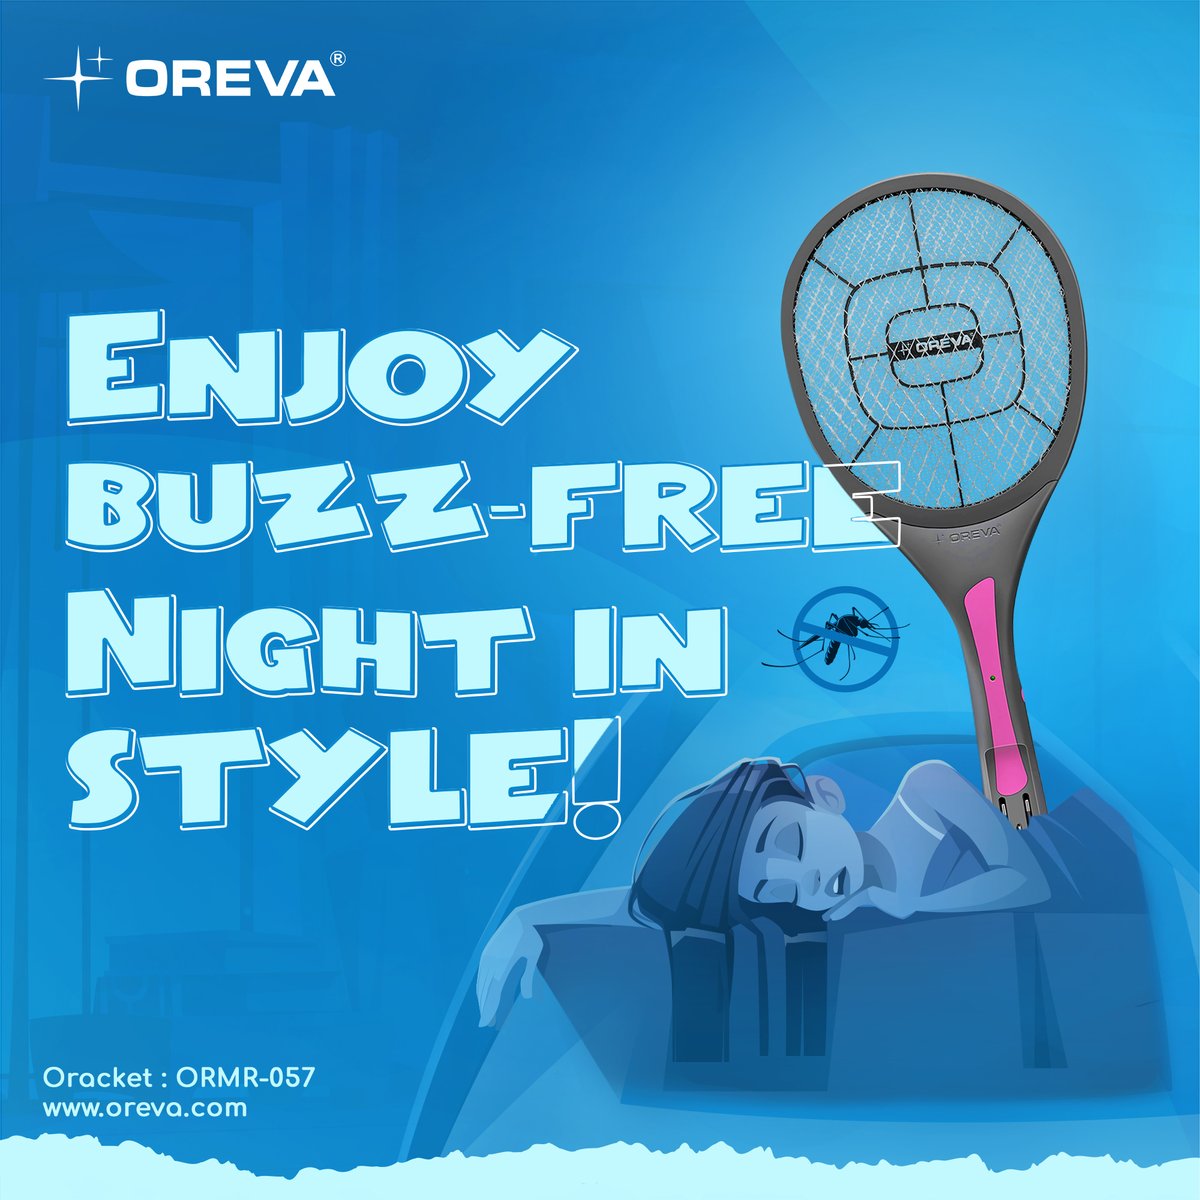 Experience the satisfaction of buzz-free surroundings & happiness of uninterrupted sleep with Oracket (ORMR-057).

To shop Oreva products, visit – shoporeva.com 

#oreva #mosquitoracket #buymosquitoracket #oracket #mosquitosolution #mosquitore #home #sleep #bettersleep